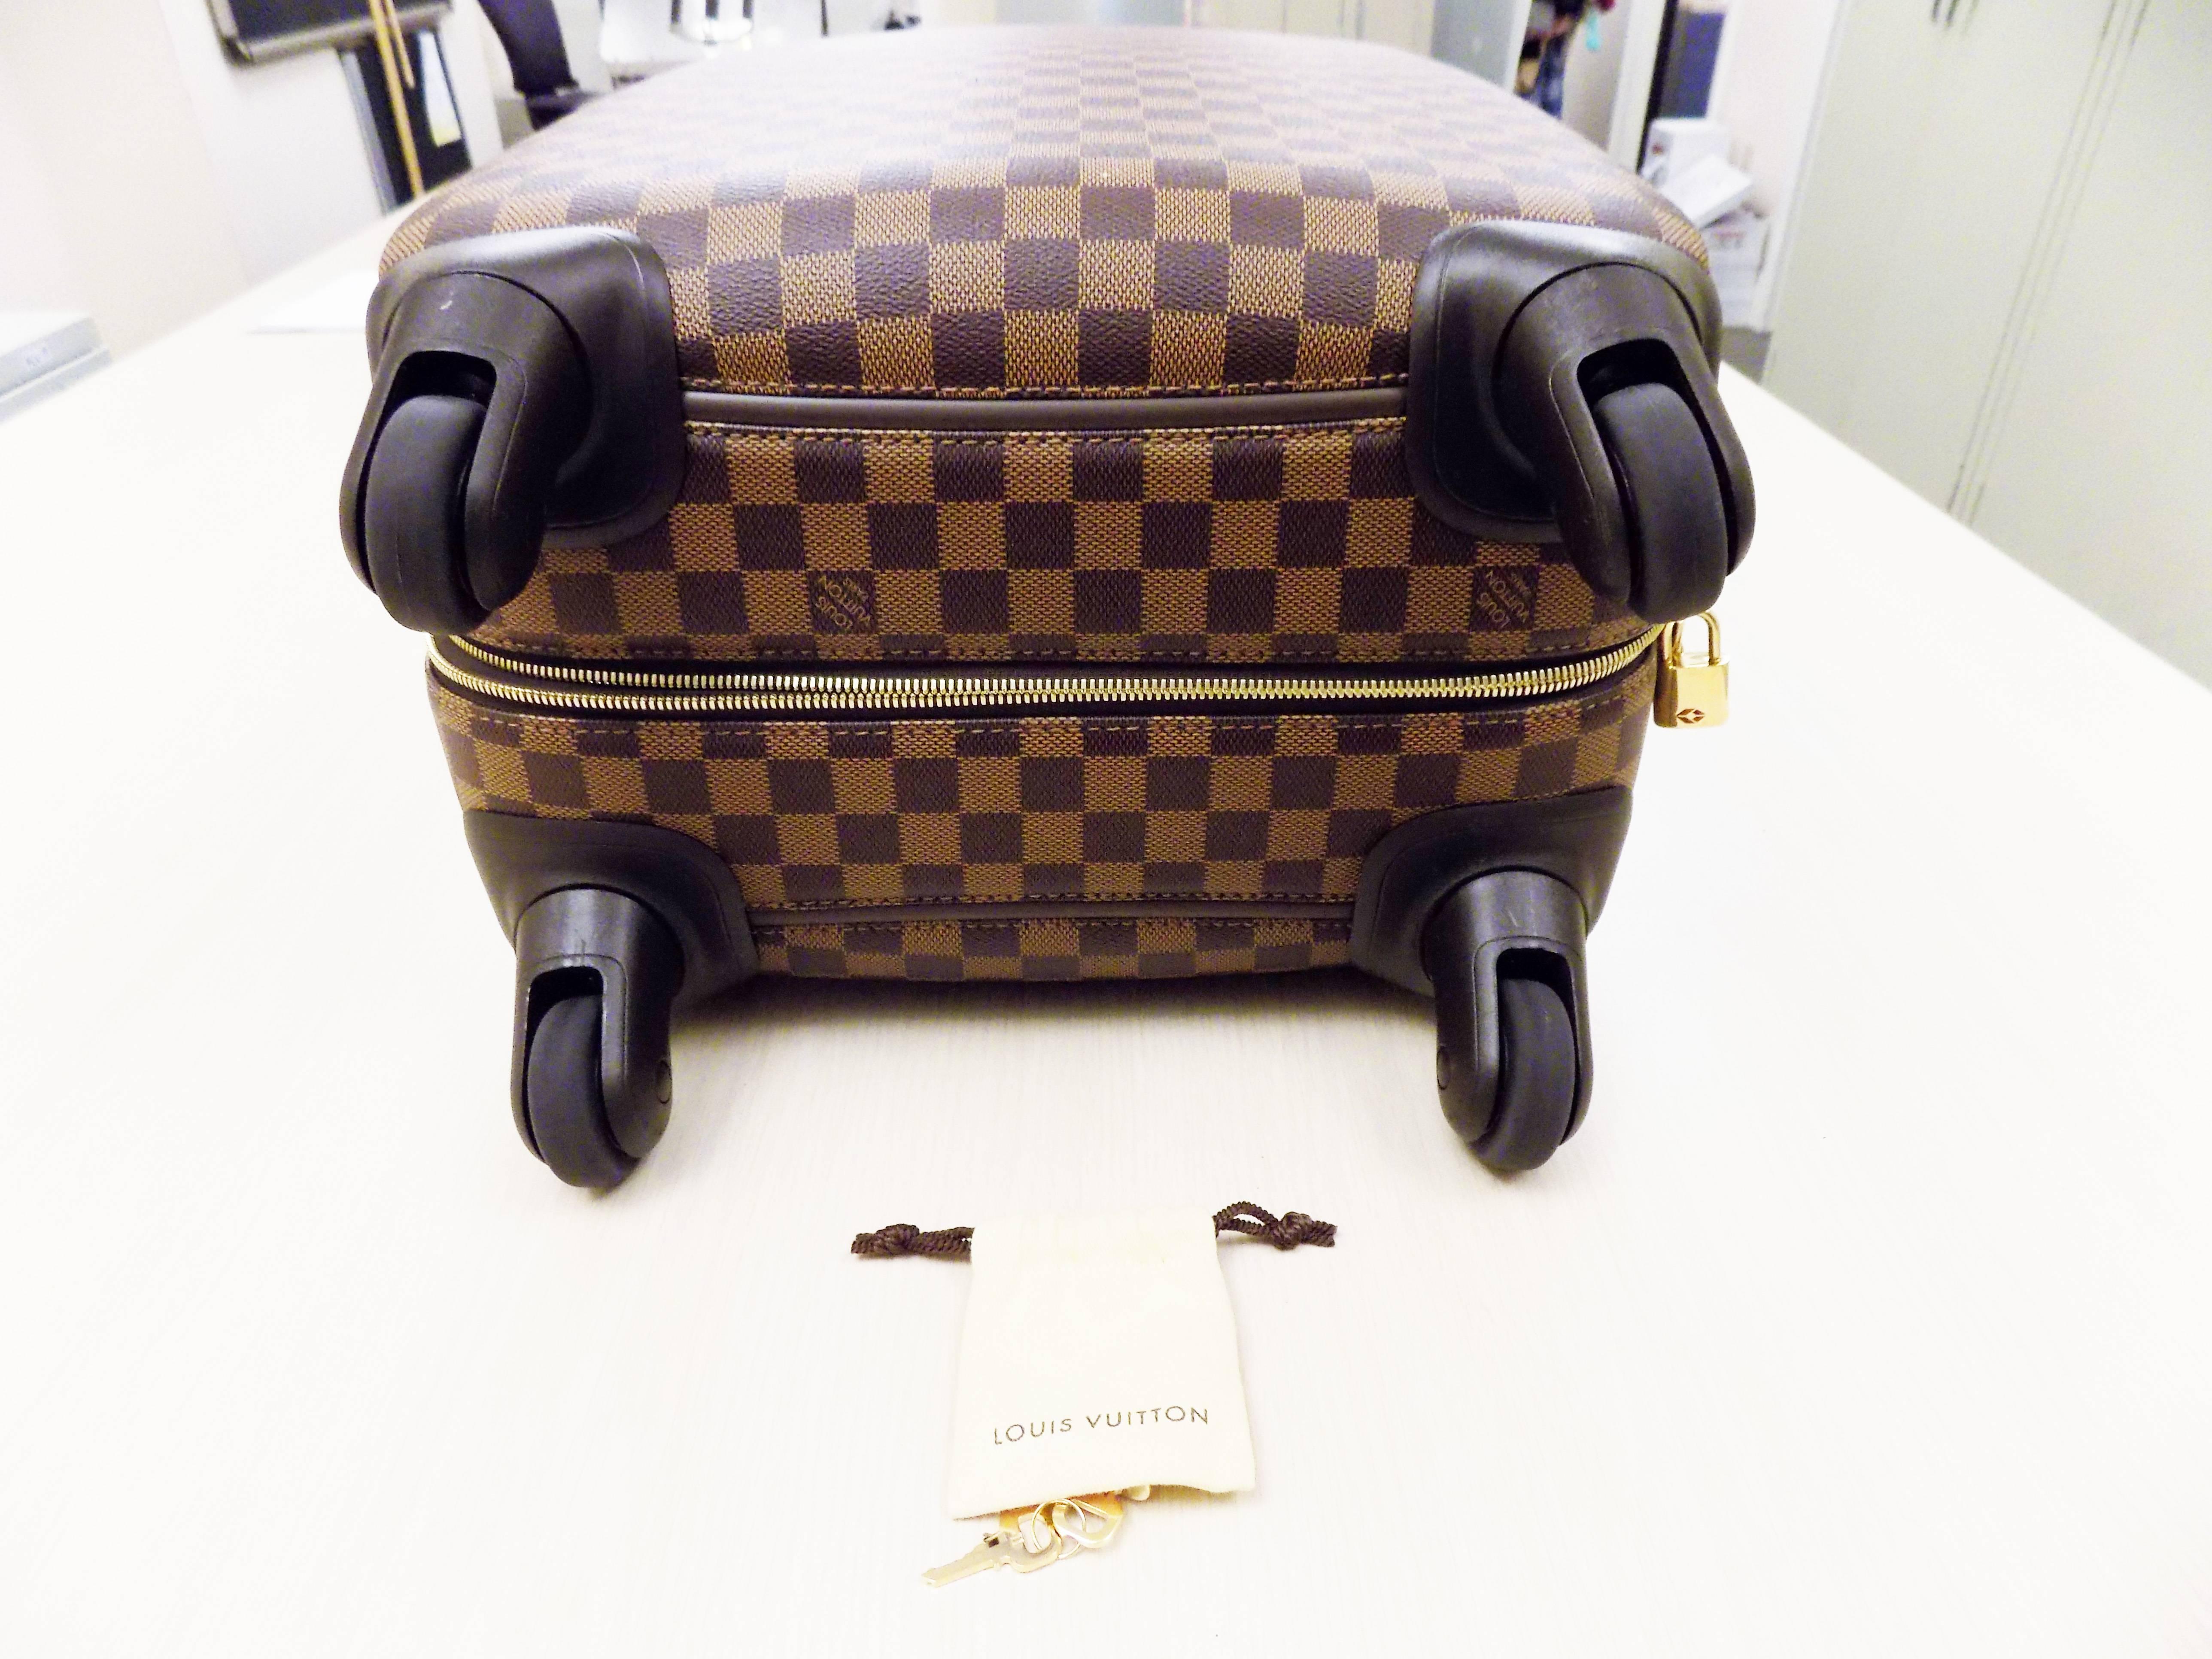 Louis Vuitton Damier Ebene Zephyr 55 men luggage bag In Excellent Condition For Sale In New York, NY